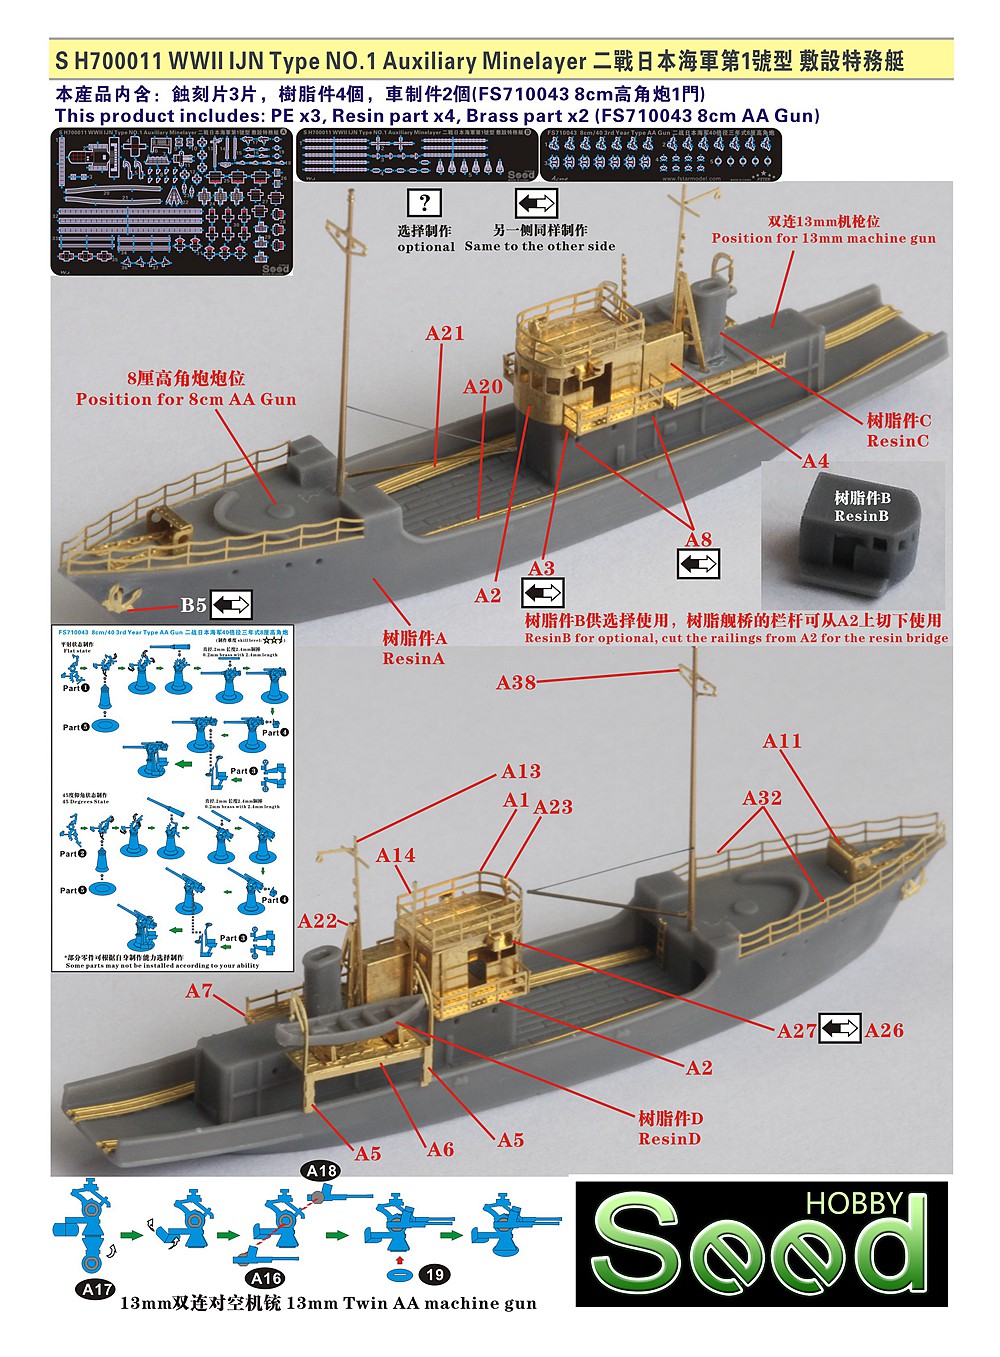 1/700 WWII IJN Type No.1 Auxiliary Minelayer Resin Kit - Click Image to Close